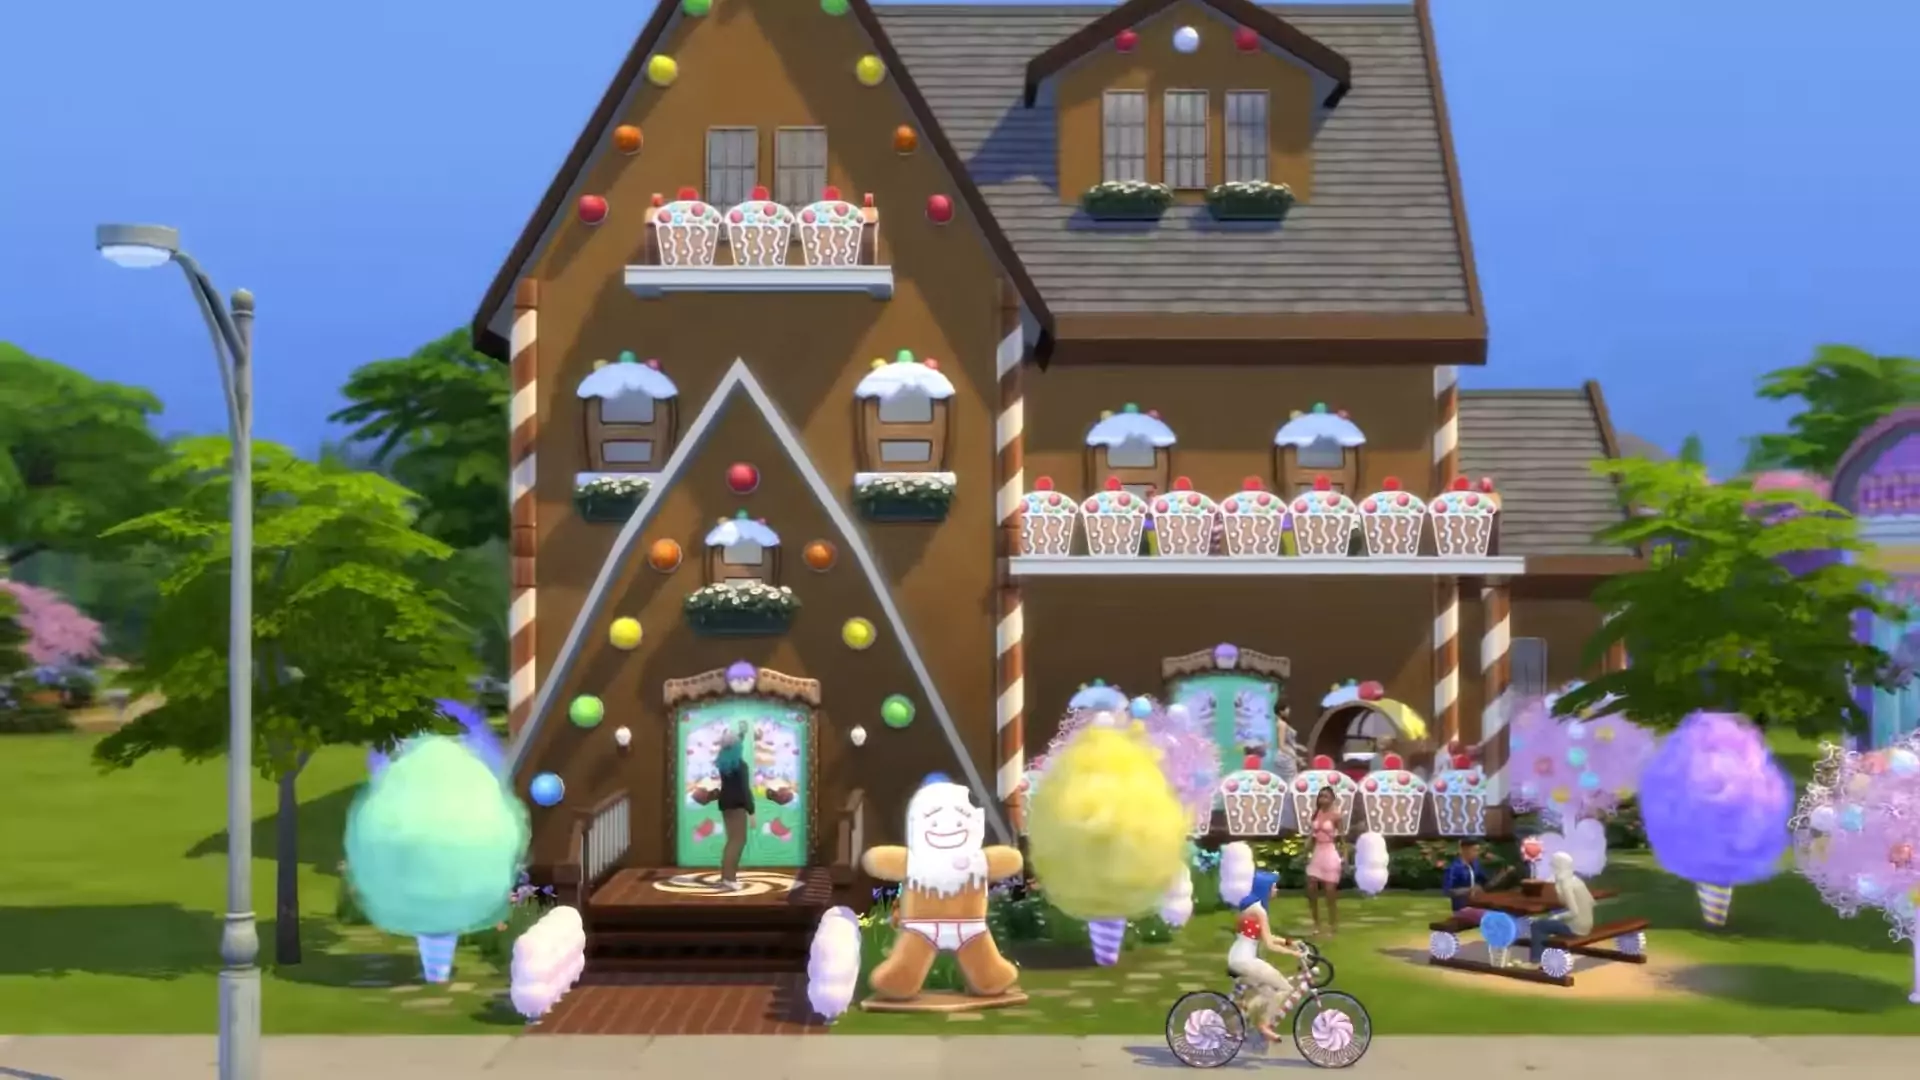 The Sims 4 Sweet Treats - Gingerbread House